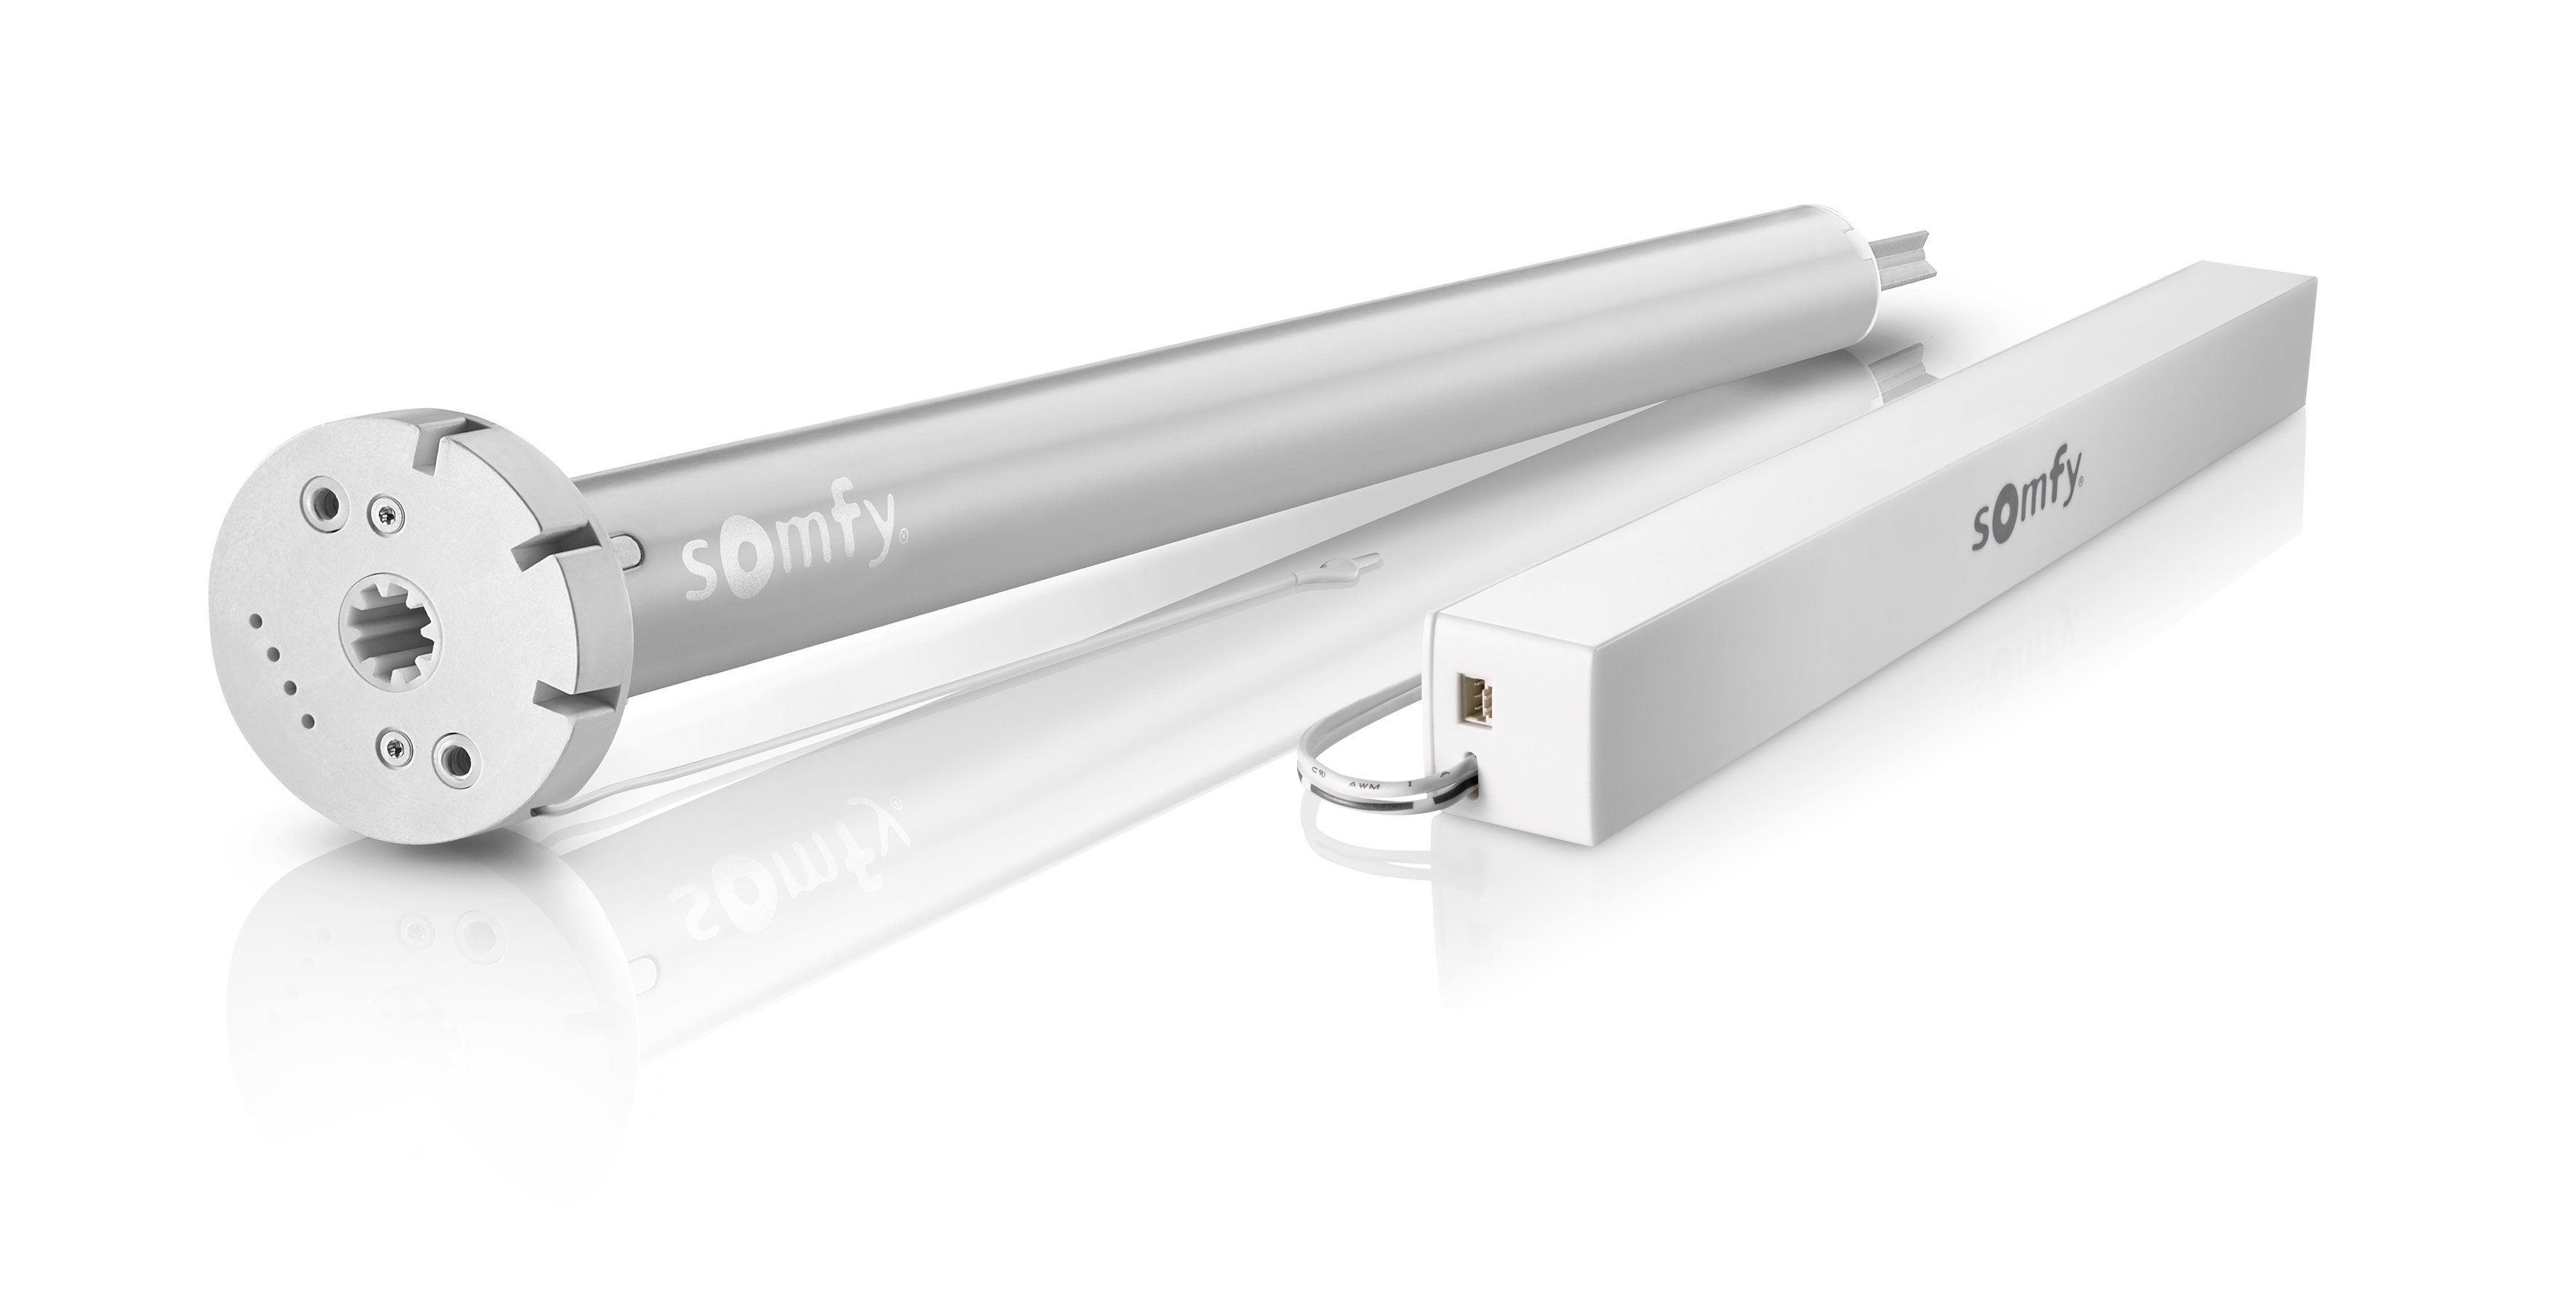 Somfy's New Sonesse® 28 WireFree RTS External Battery Motor Offers Quiet,  Wireless Convenience for Motorized Window Coverings